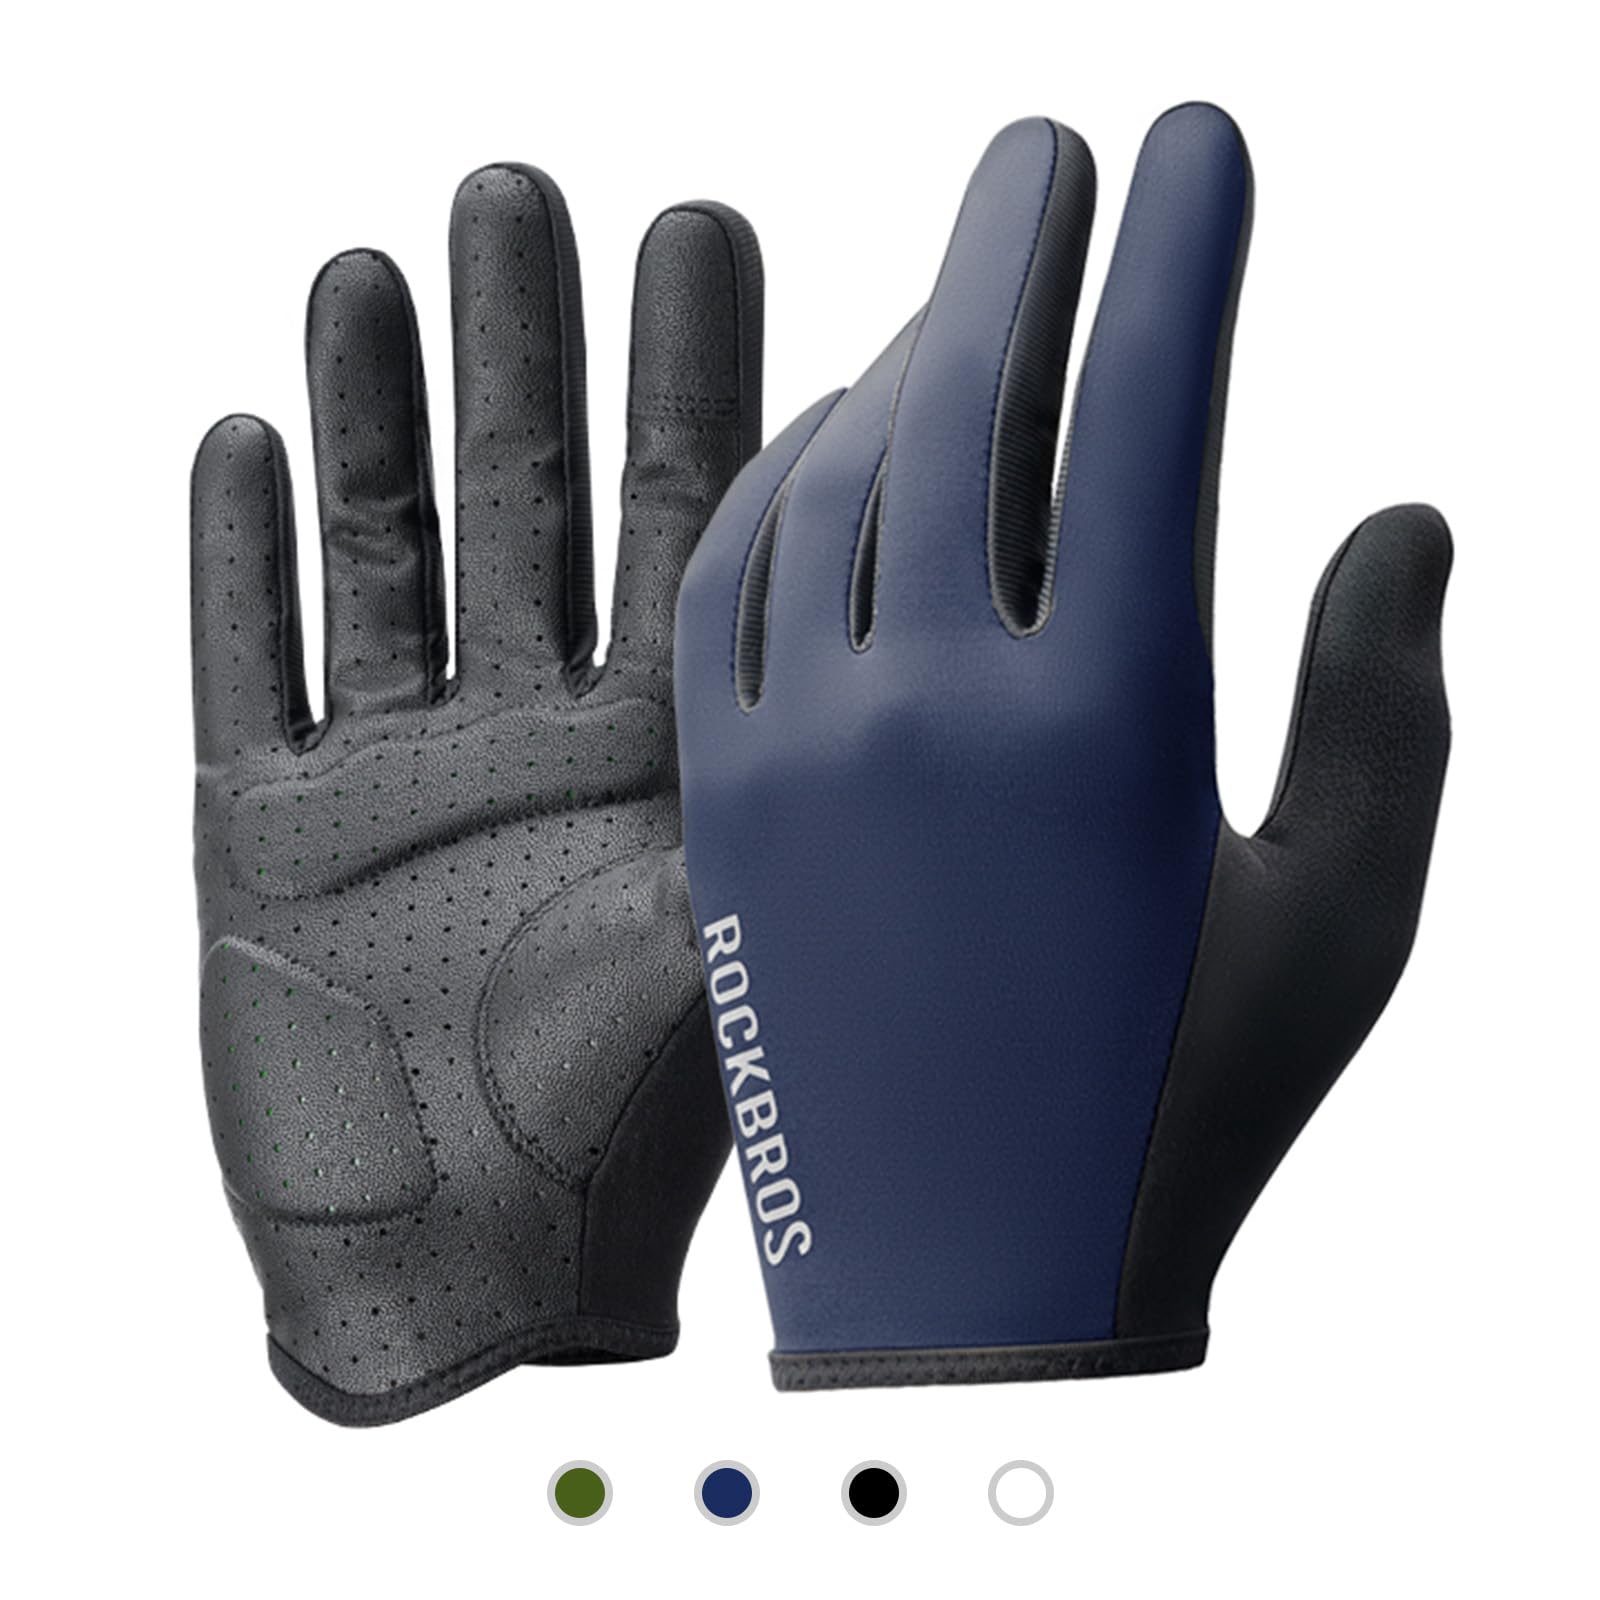 ROCKBROS Road-to-Sky Spring Summer Cycling Gloves Full Finger Touch Screen #Color_Navy Blue